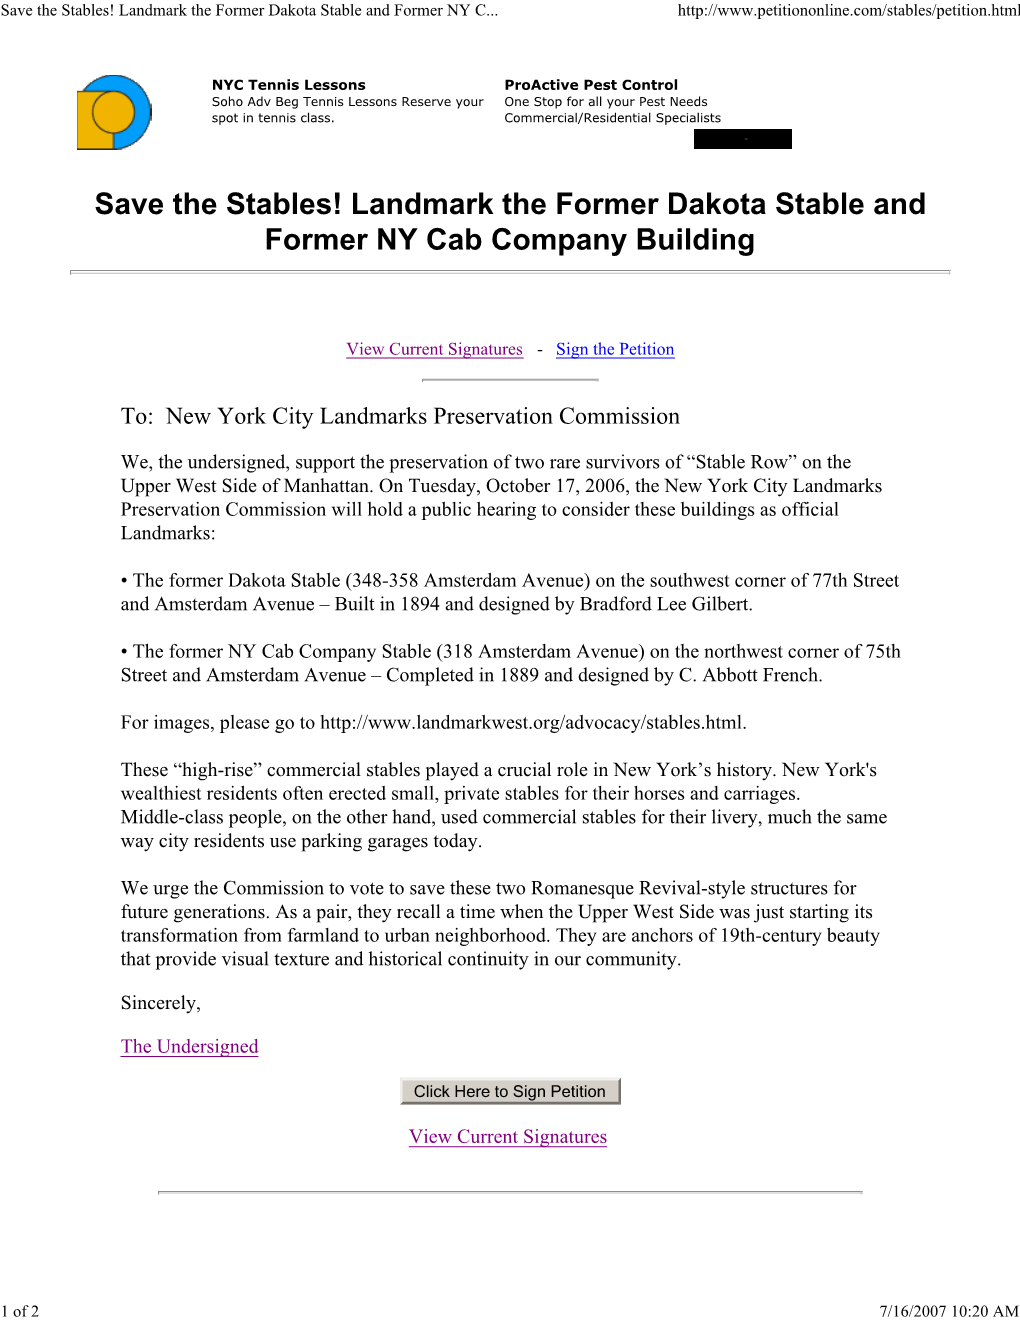 Save the Stables! Landmark the Former Dakota Stable and Former NY C